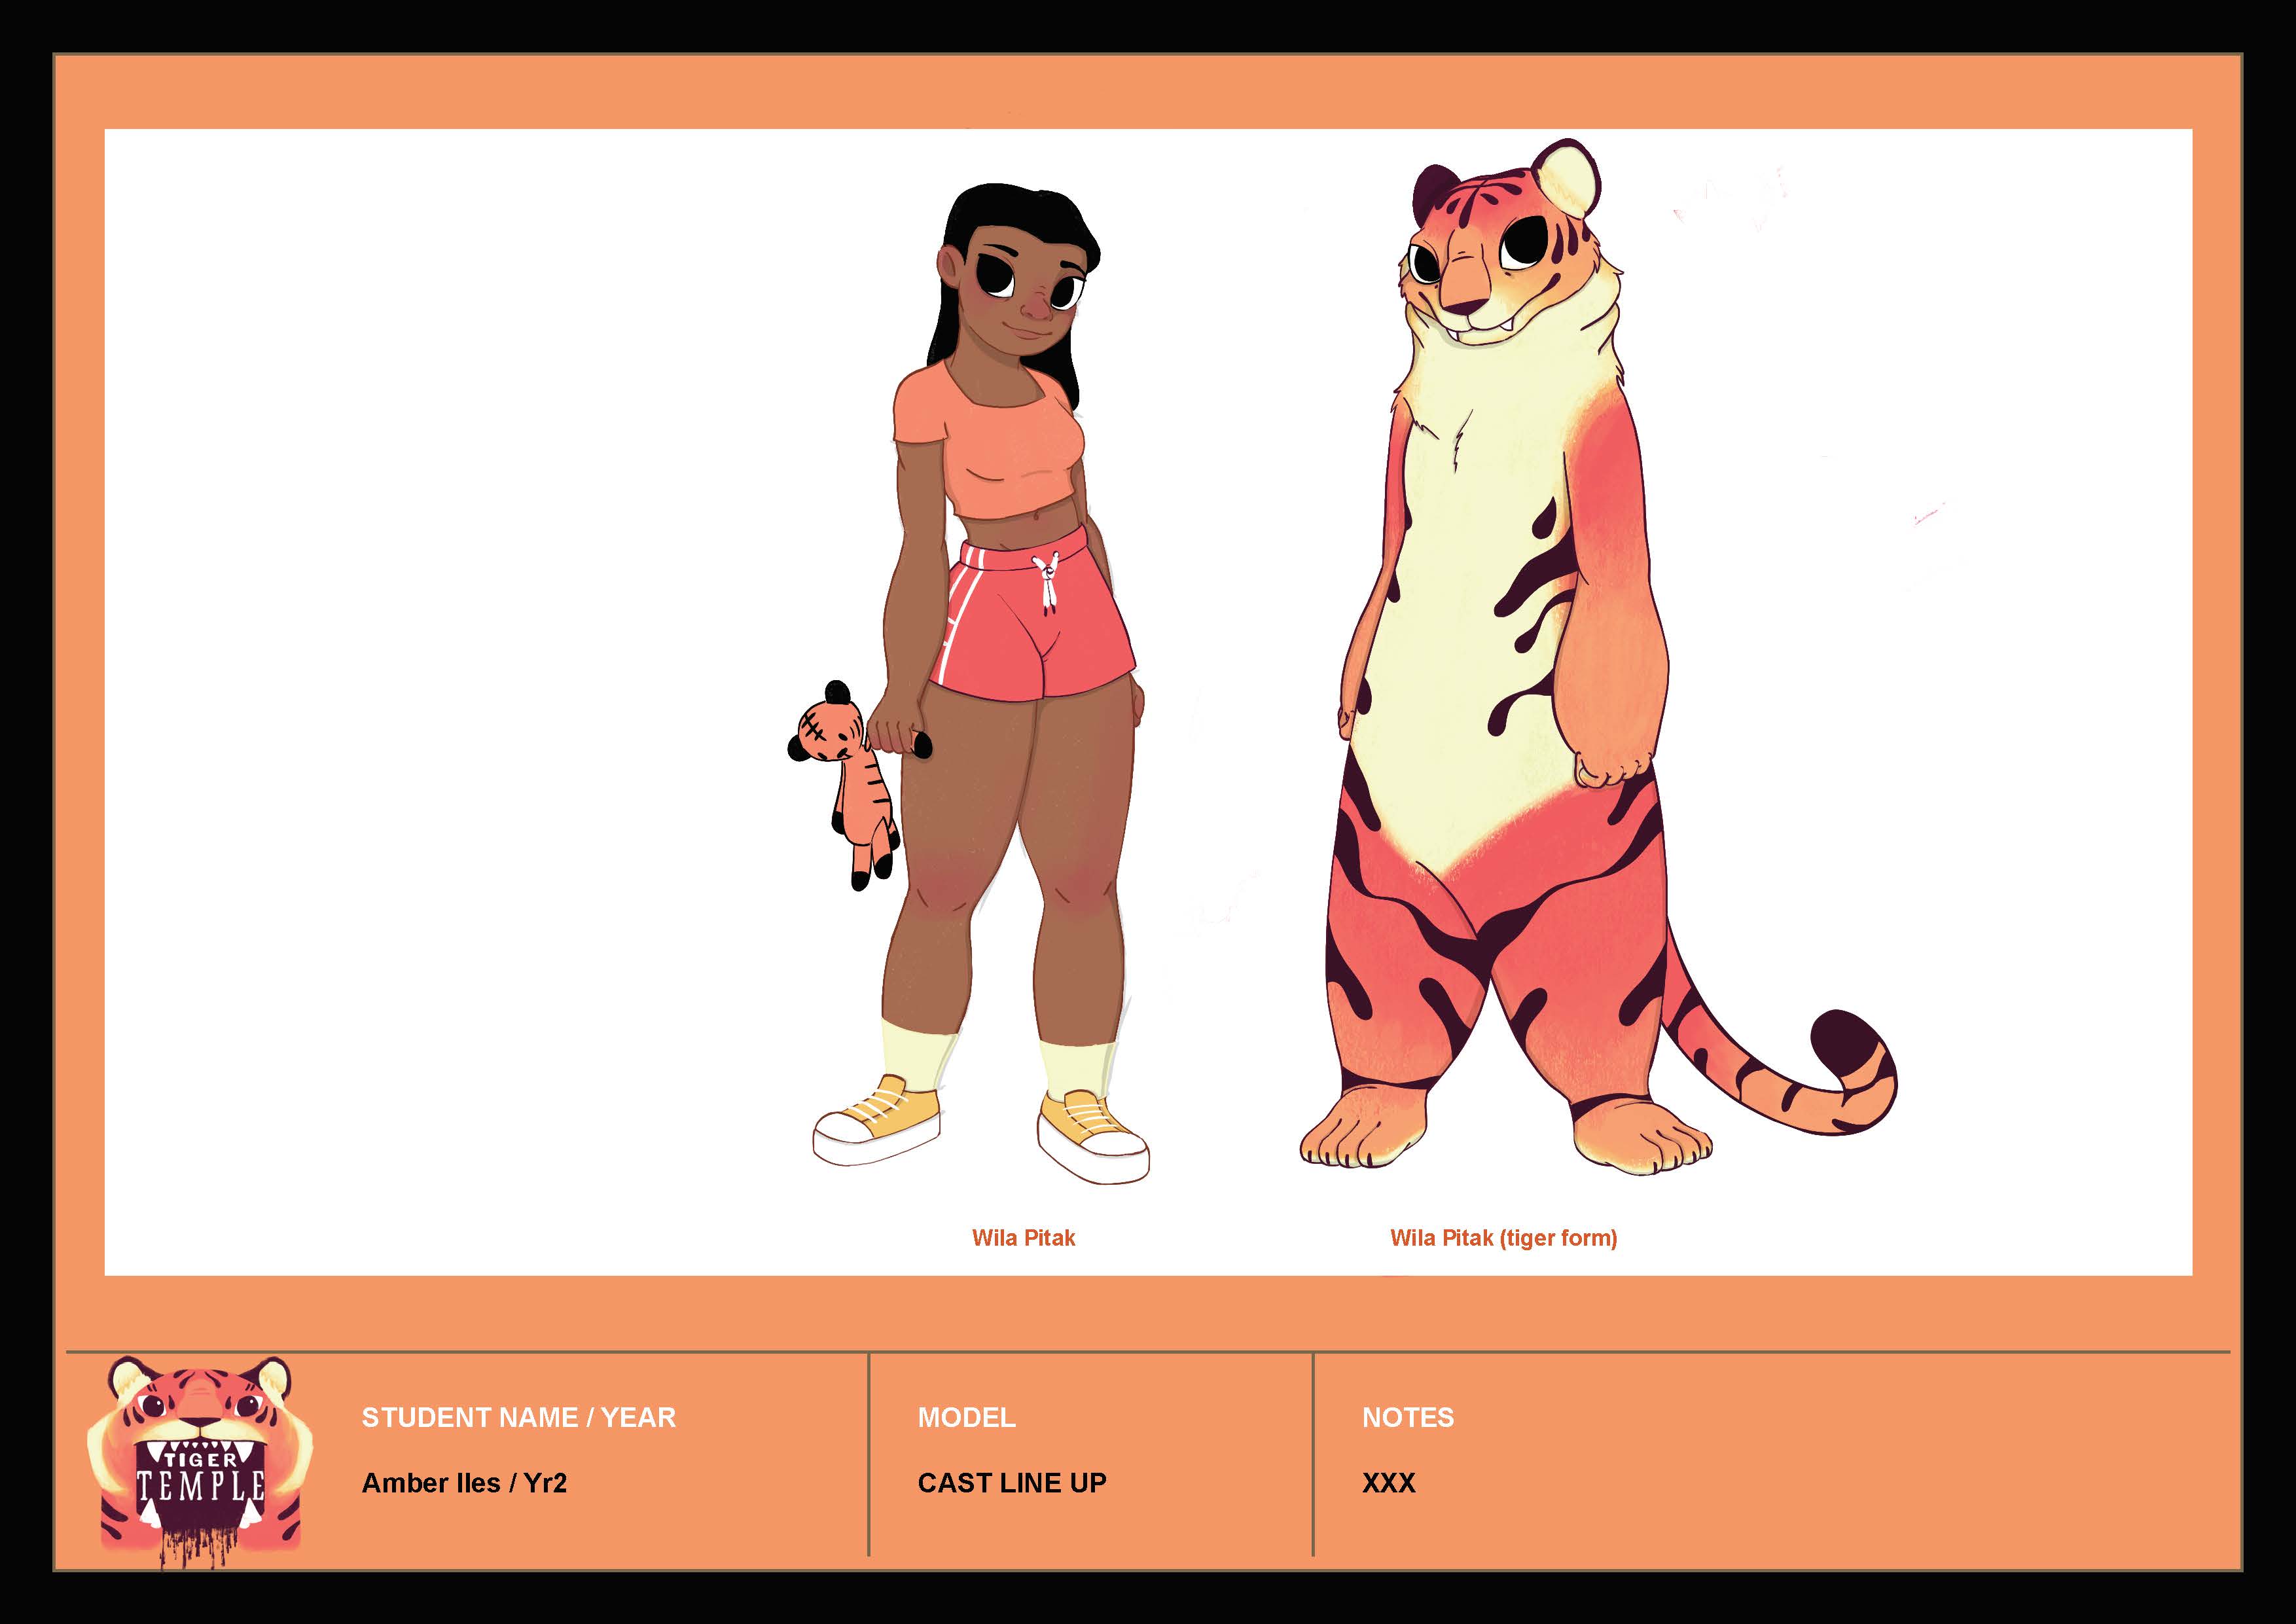 BA Animation work showing a cast of two characters, a girl and a tiger.